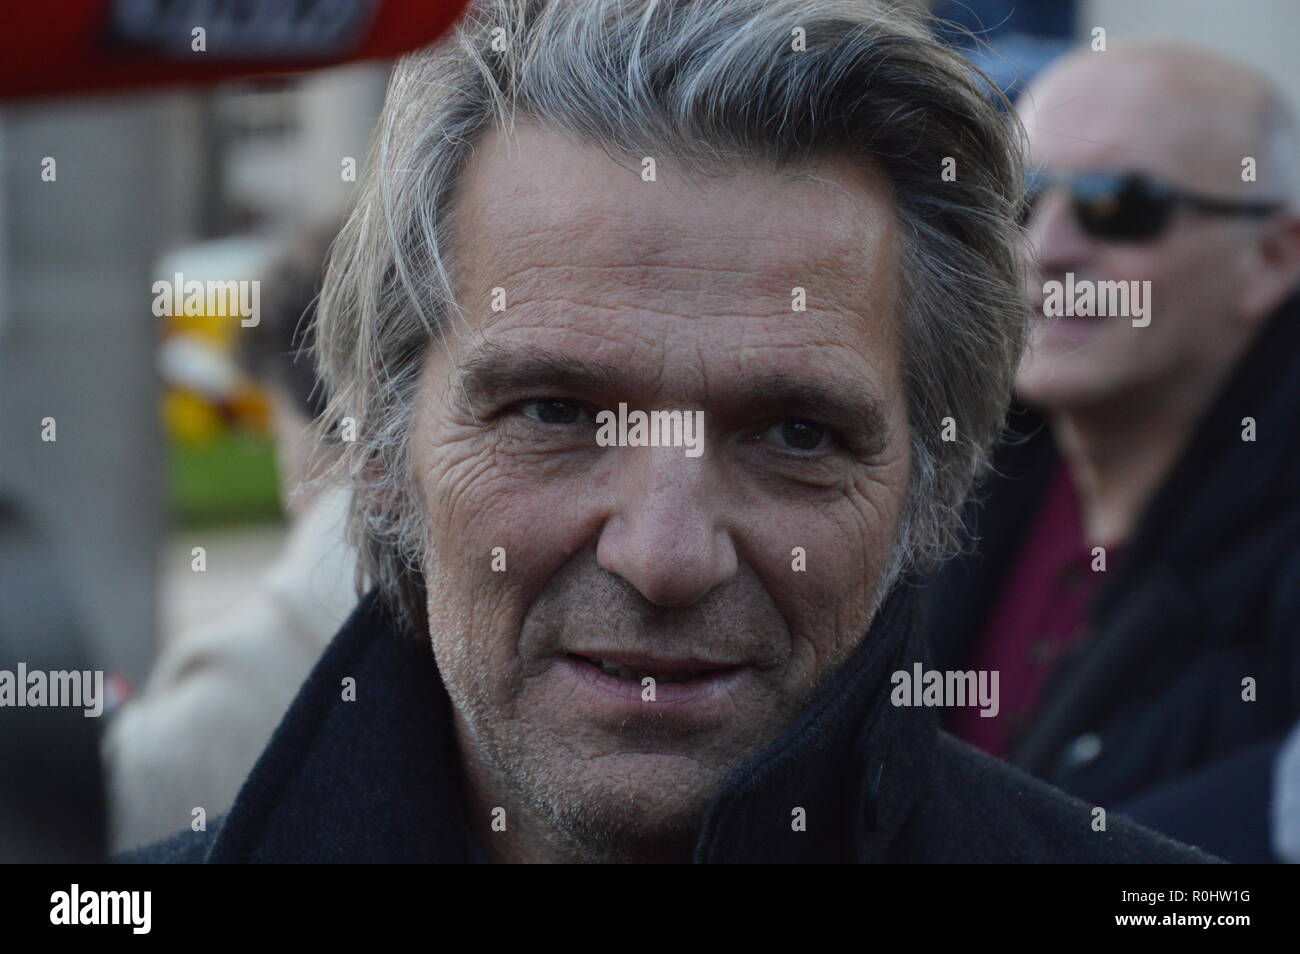 Paris, France. 5th Nov 2018. (Yvan Le Bolloc'h French TV actor). French celebrities attend the ceremony for the death of Philippe GILDAS, french TV animator. Crematorium of the Cemetery of the Pere Lachaise, Paris, France. 5 november 2018. 13h30.  ALPHACIT NEWIM / Alamy Live News Credit: Alphacit NEWIM/Alamy Live News Stock Photo